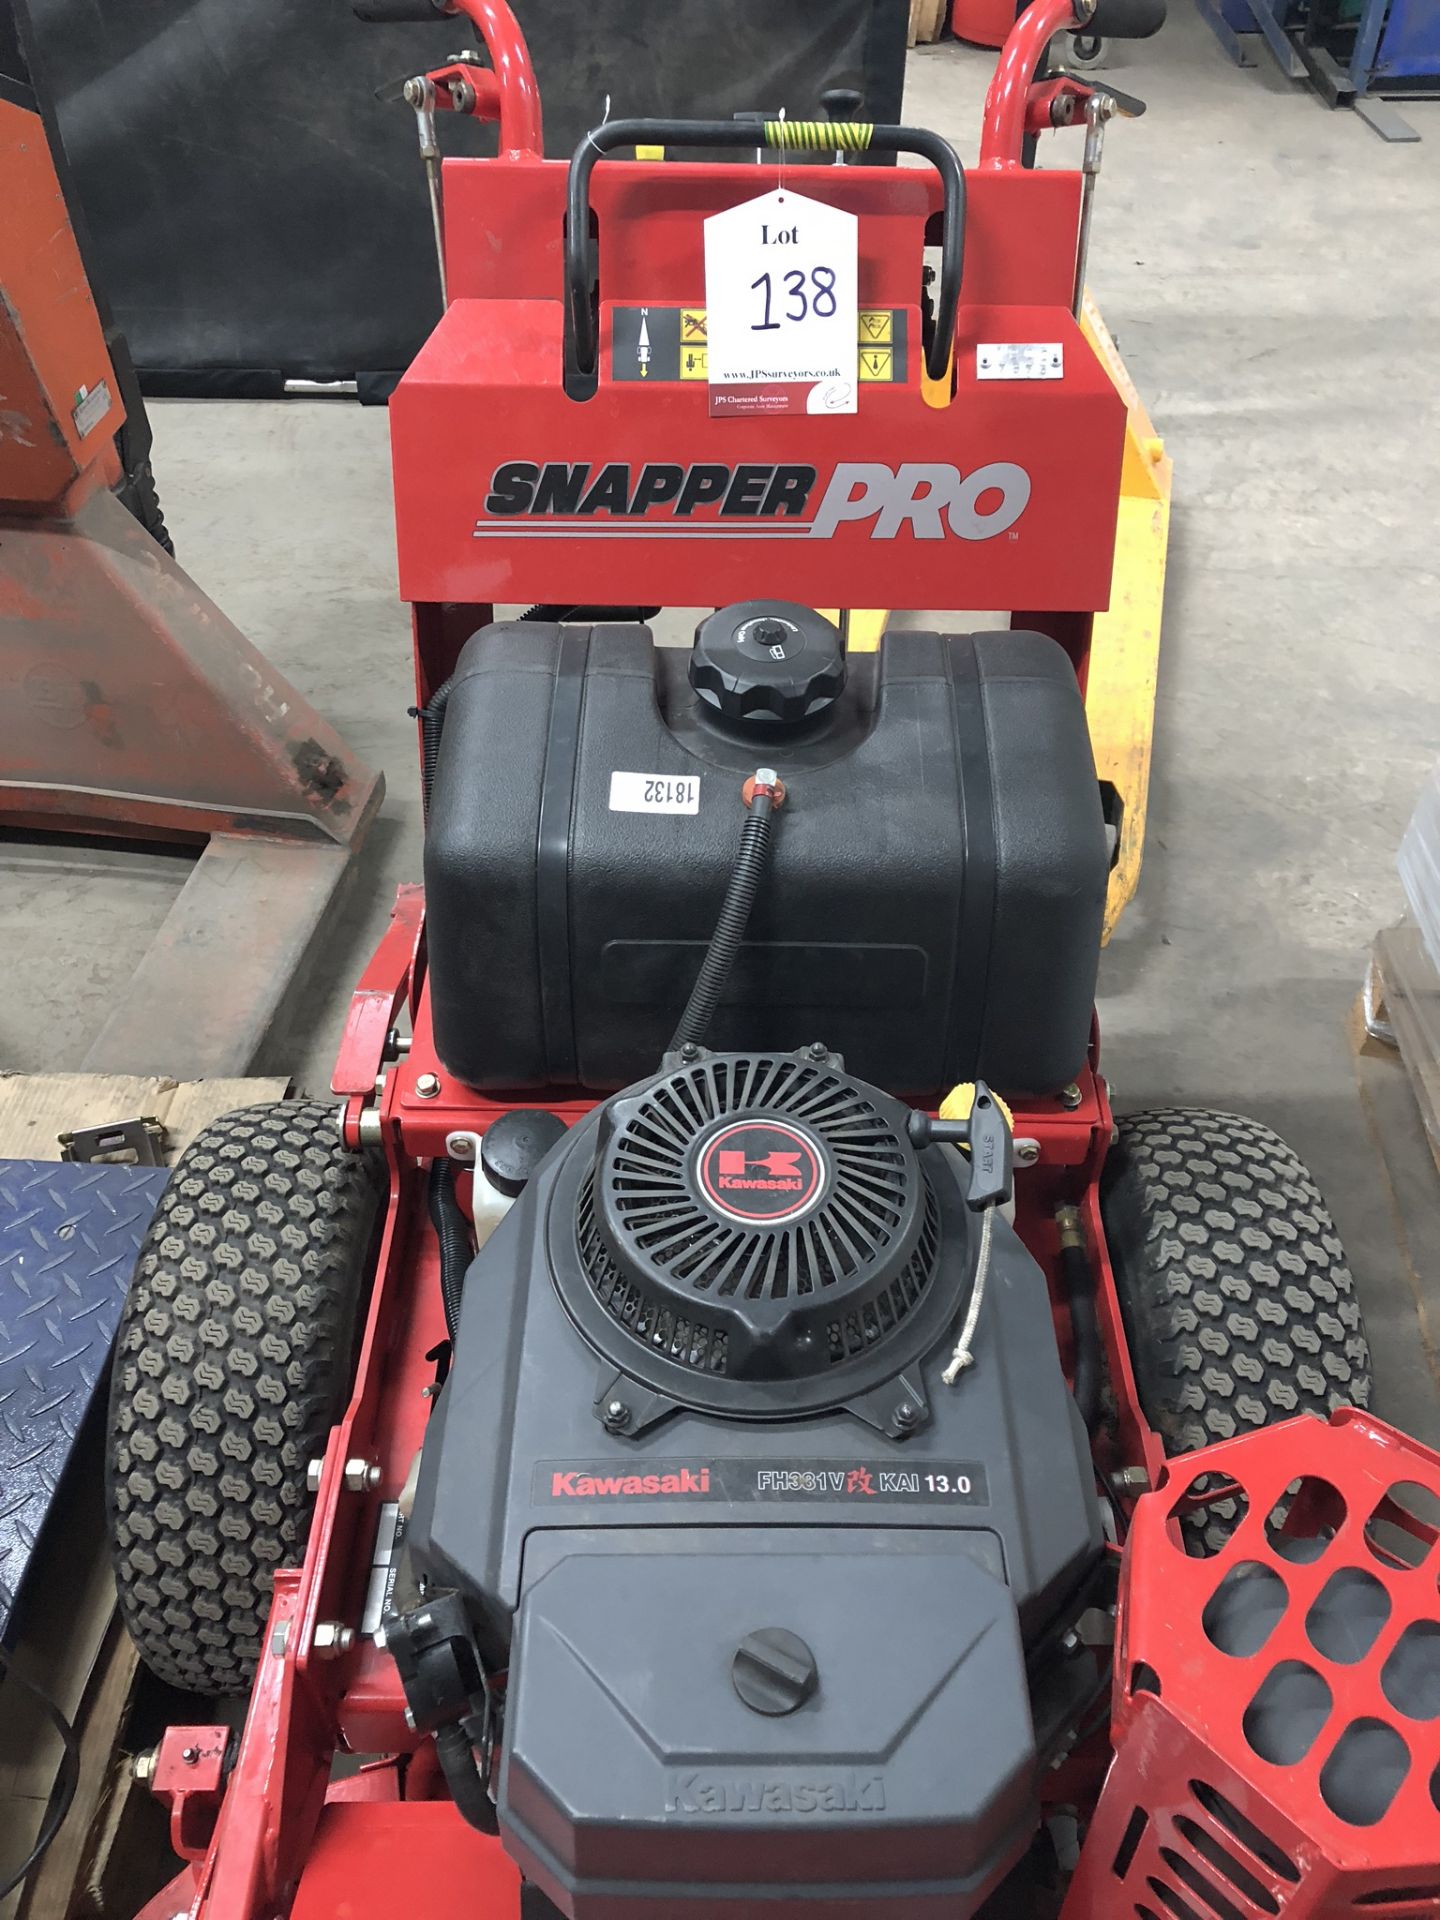 Snapper Pro with Kawasaki Engine - Image 3 of 5